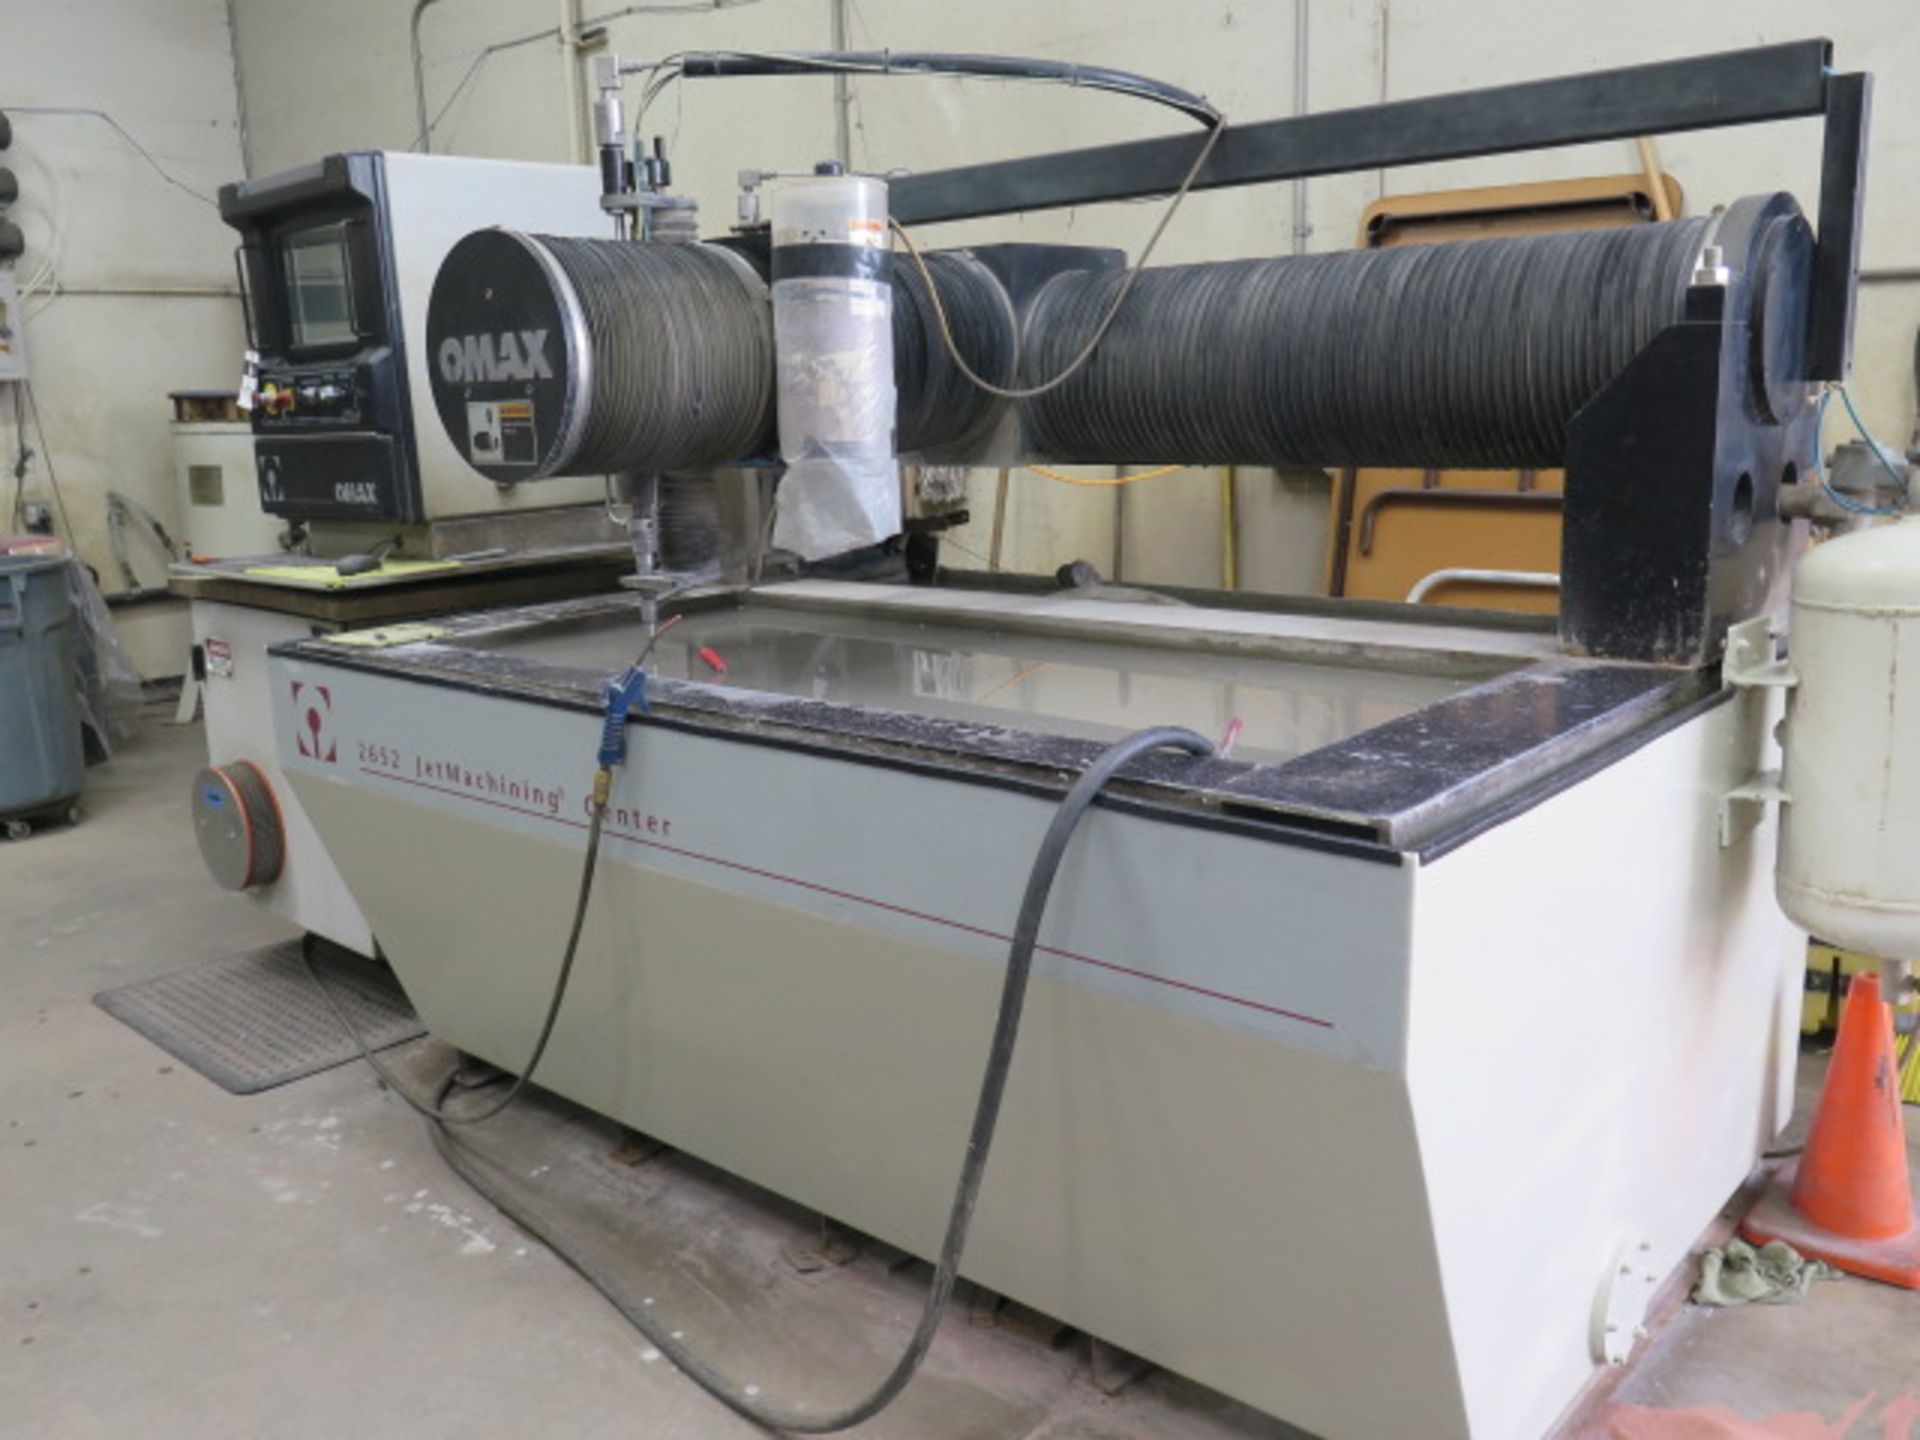 Omax mdl. 2652 2’ x 4’ CNC WaterJet Machine s/n B511824 w/ Omax MAKE Precision Velocity, SOLD AS IS - Image 2 of 17